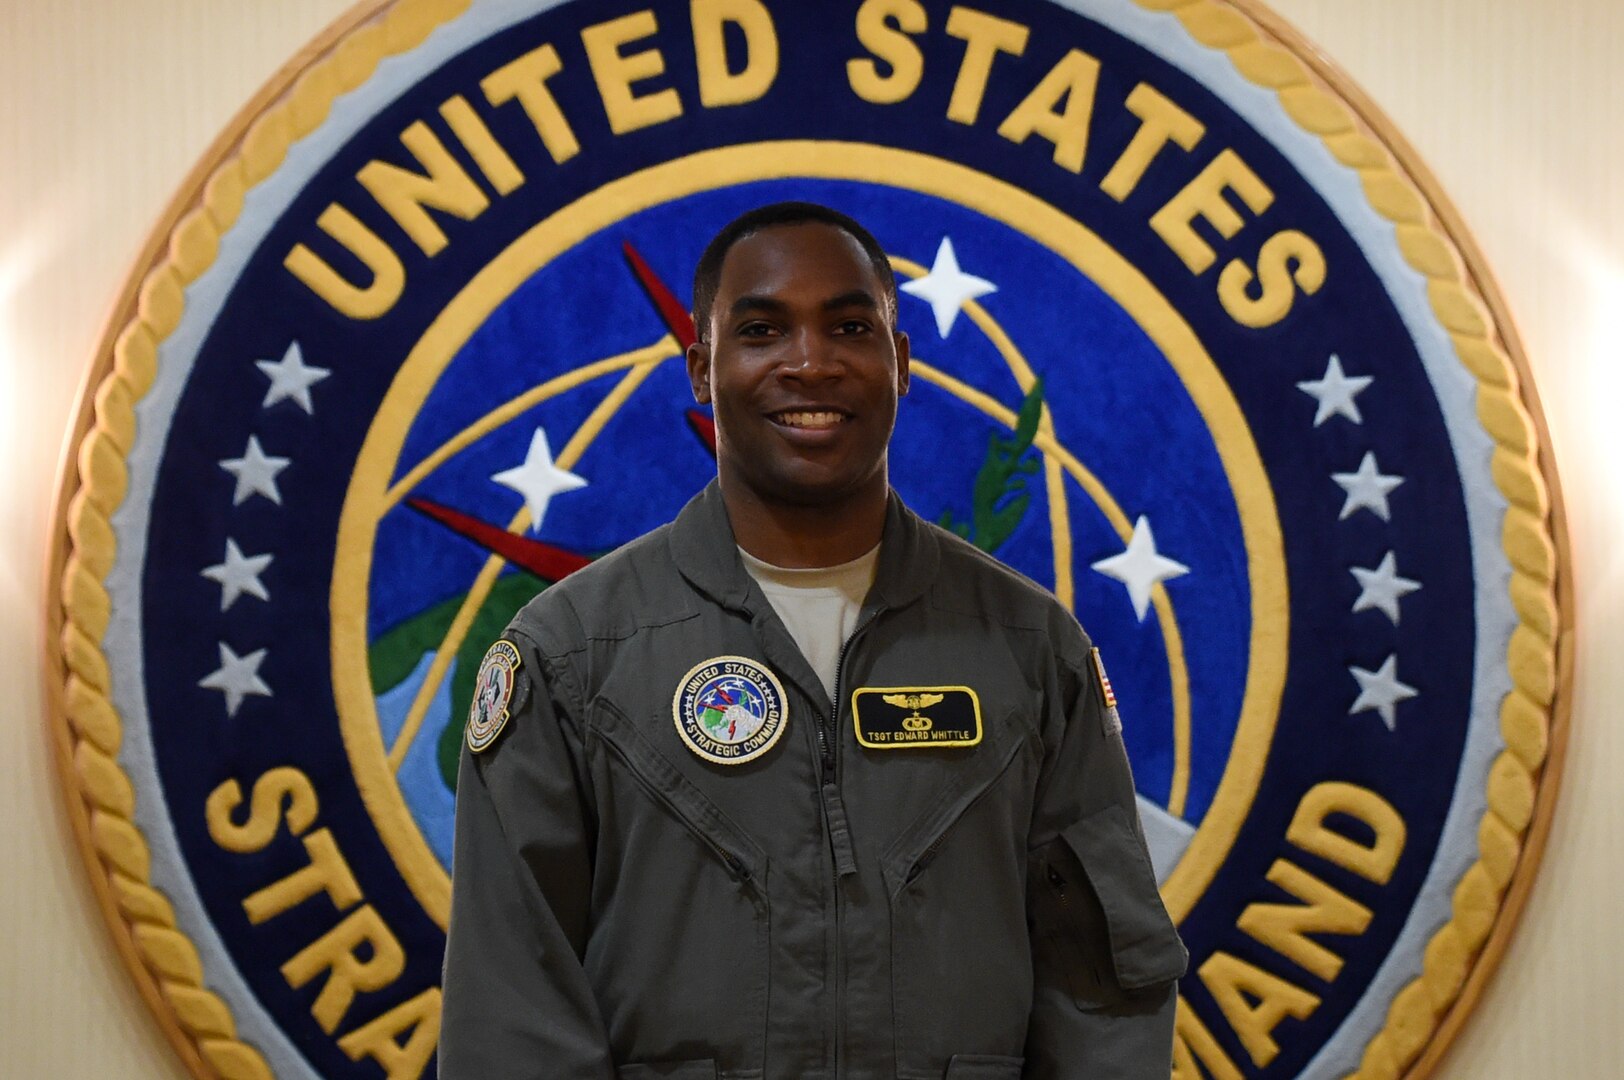 Tech. Sgt. Edward Whittle Jr. is selected as the Enlisted Corps Spotlight for October.